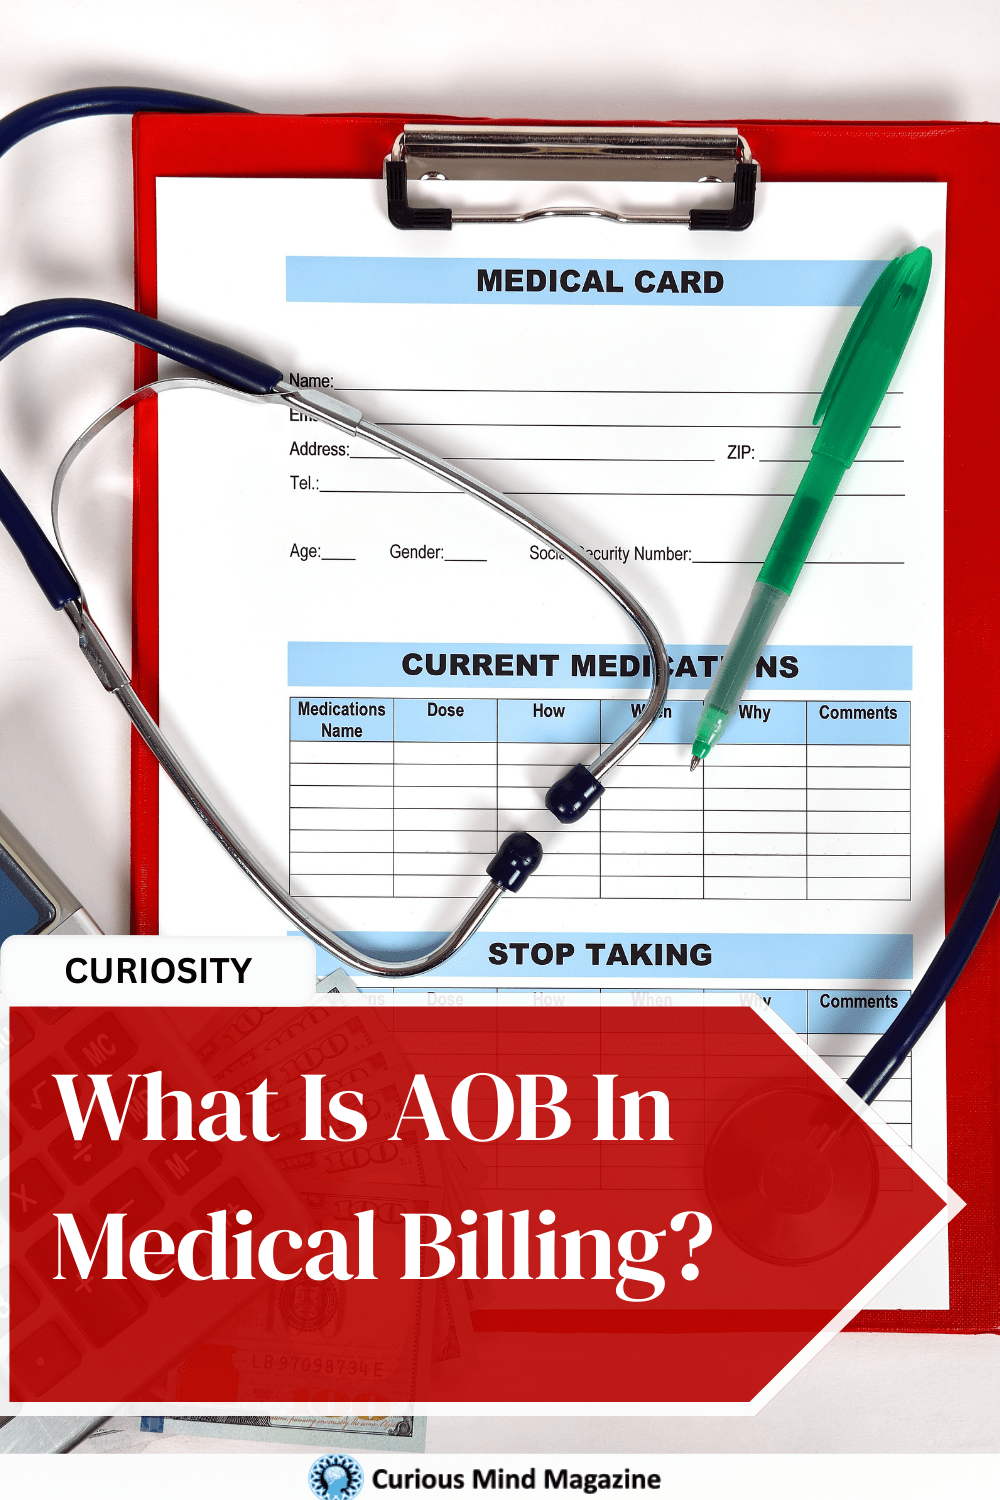 What Is AOB In Medical Billing?